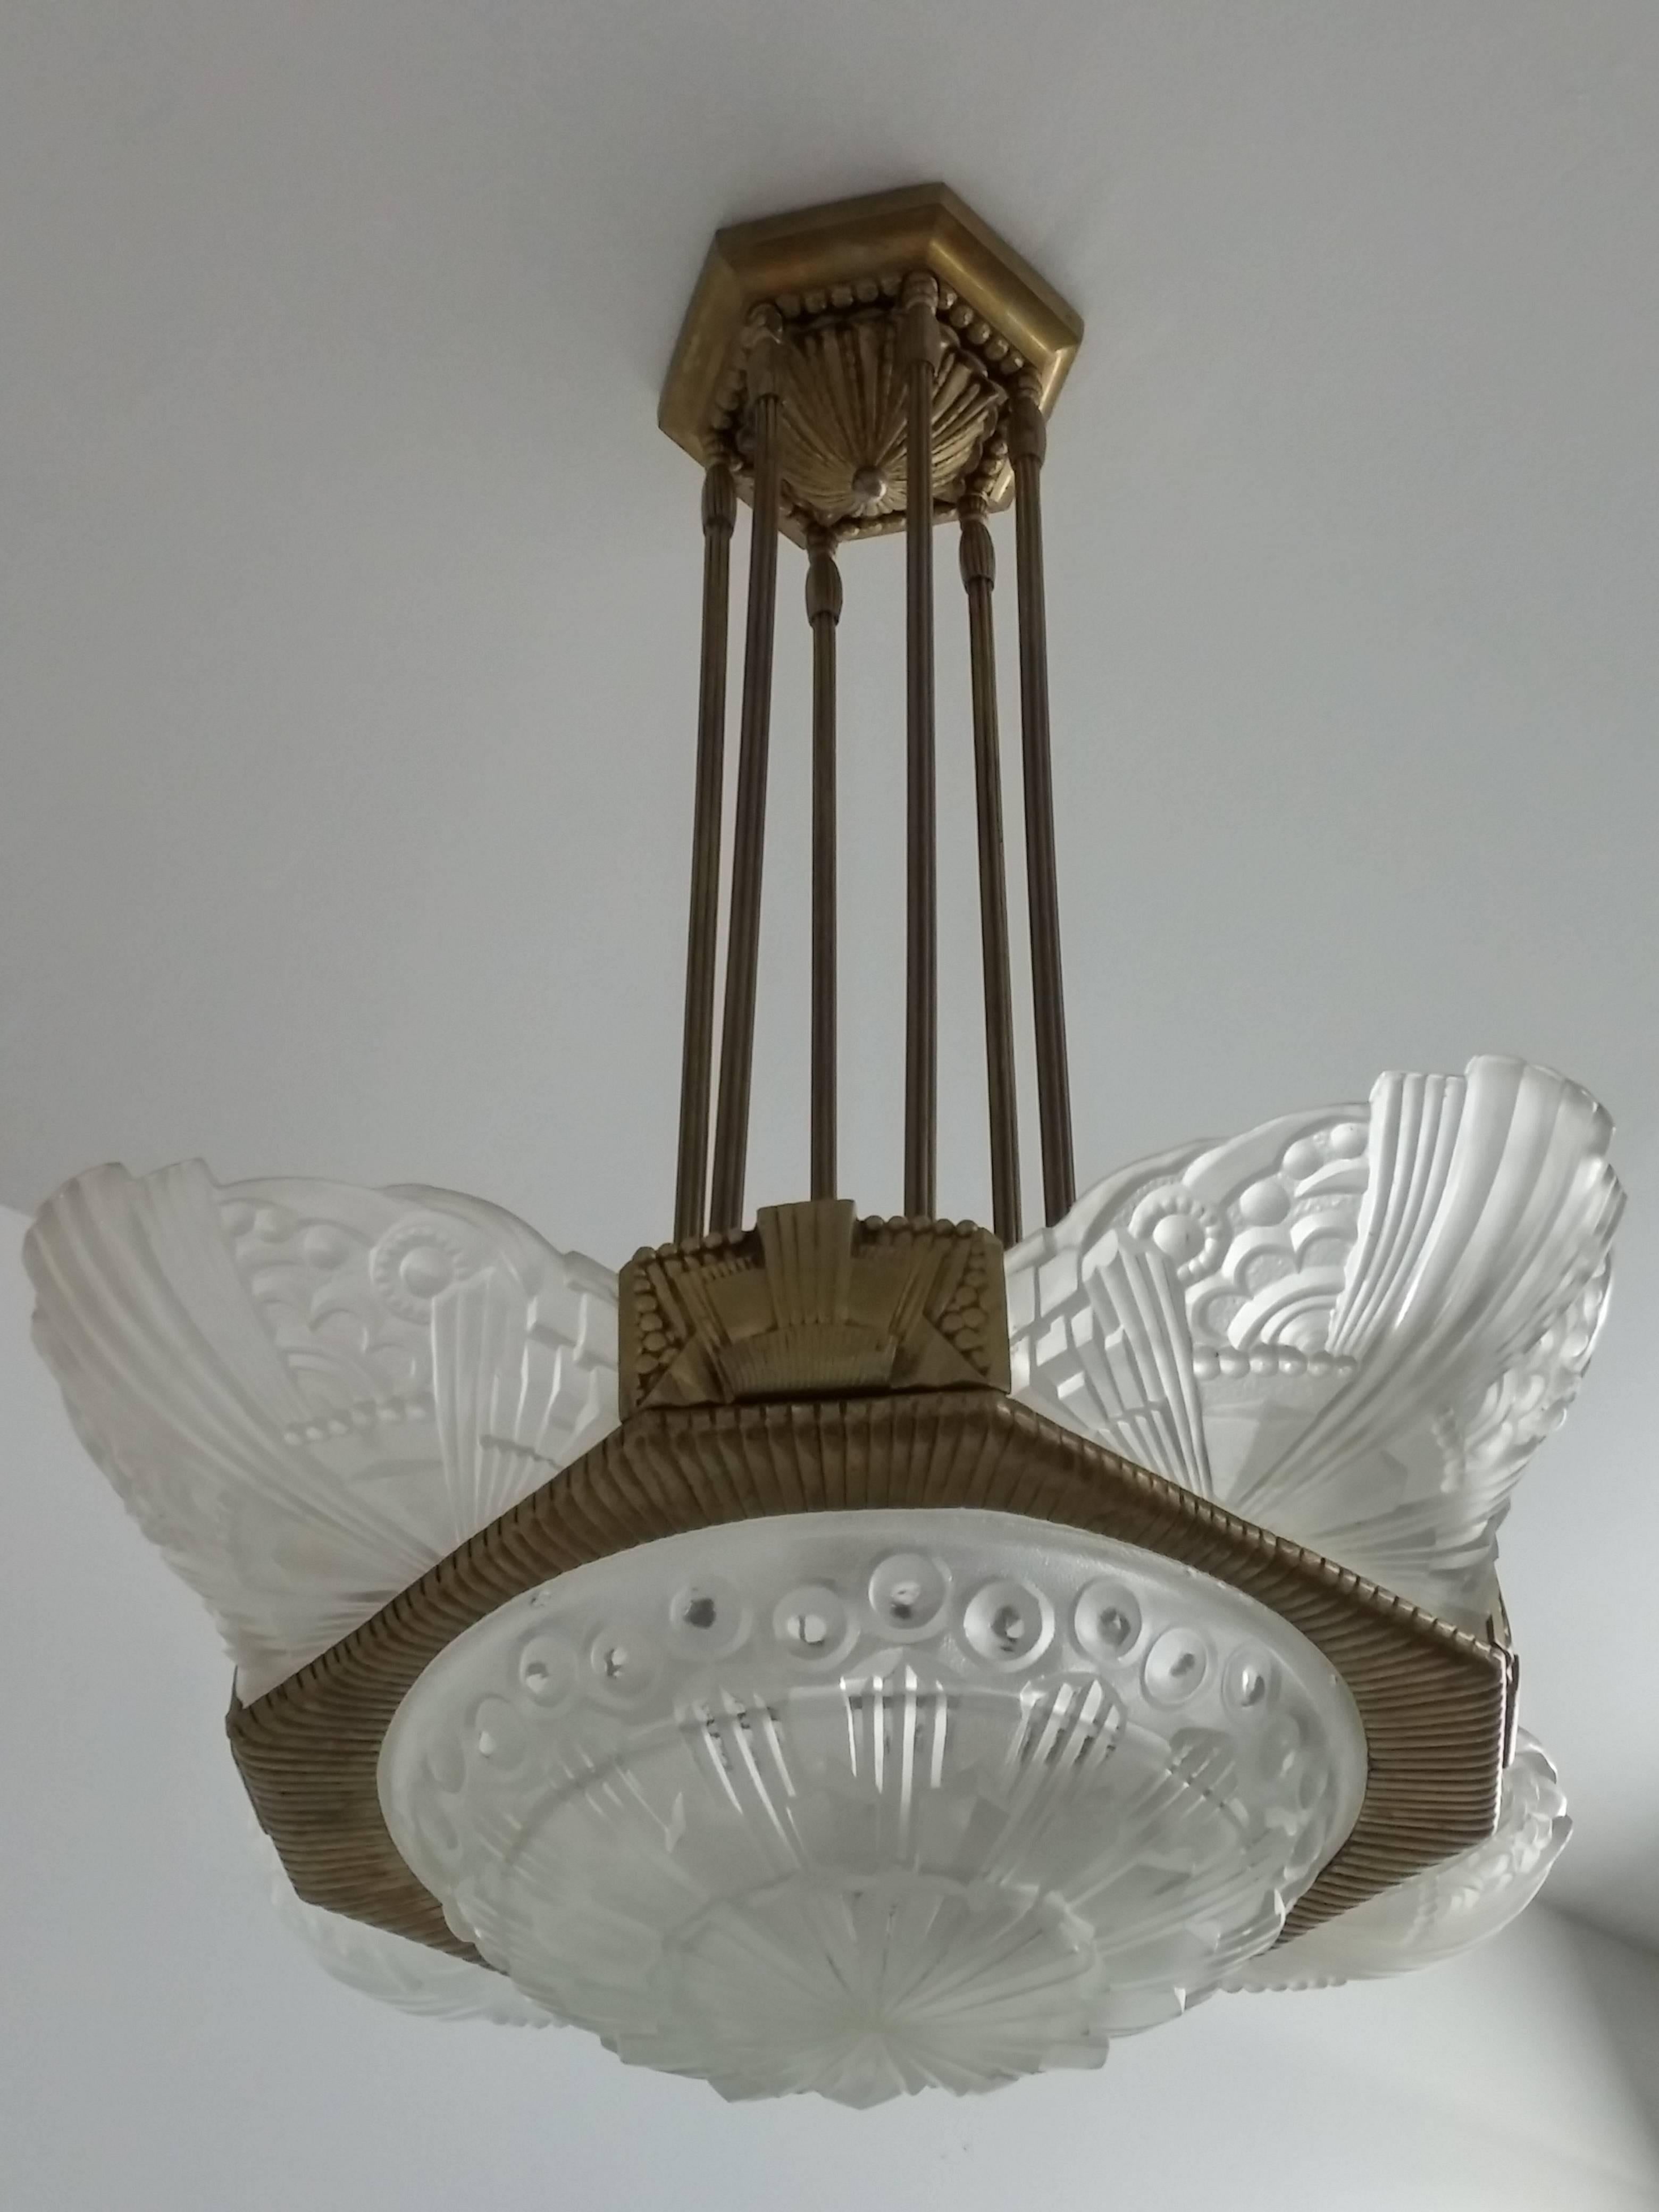 This outstanding French Art Deco chandelier was designed by 